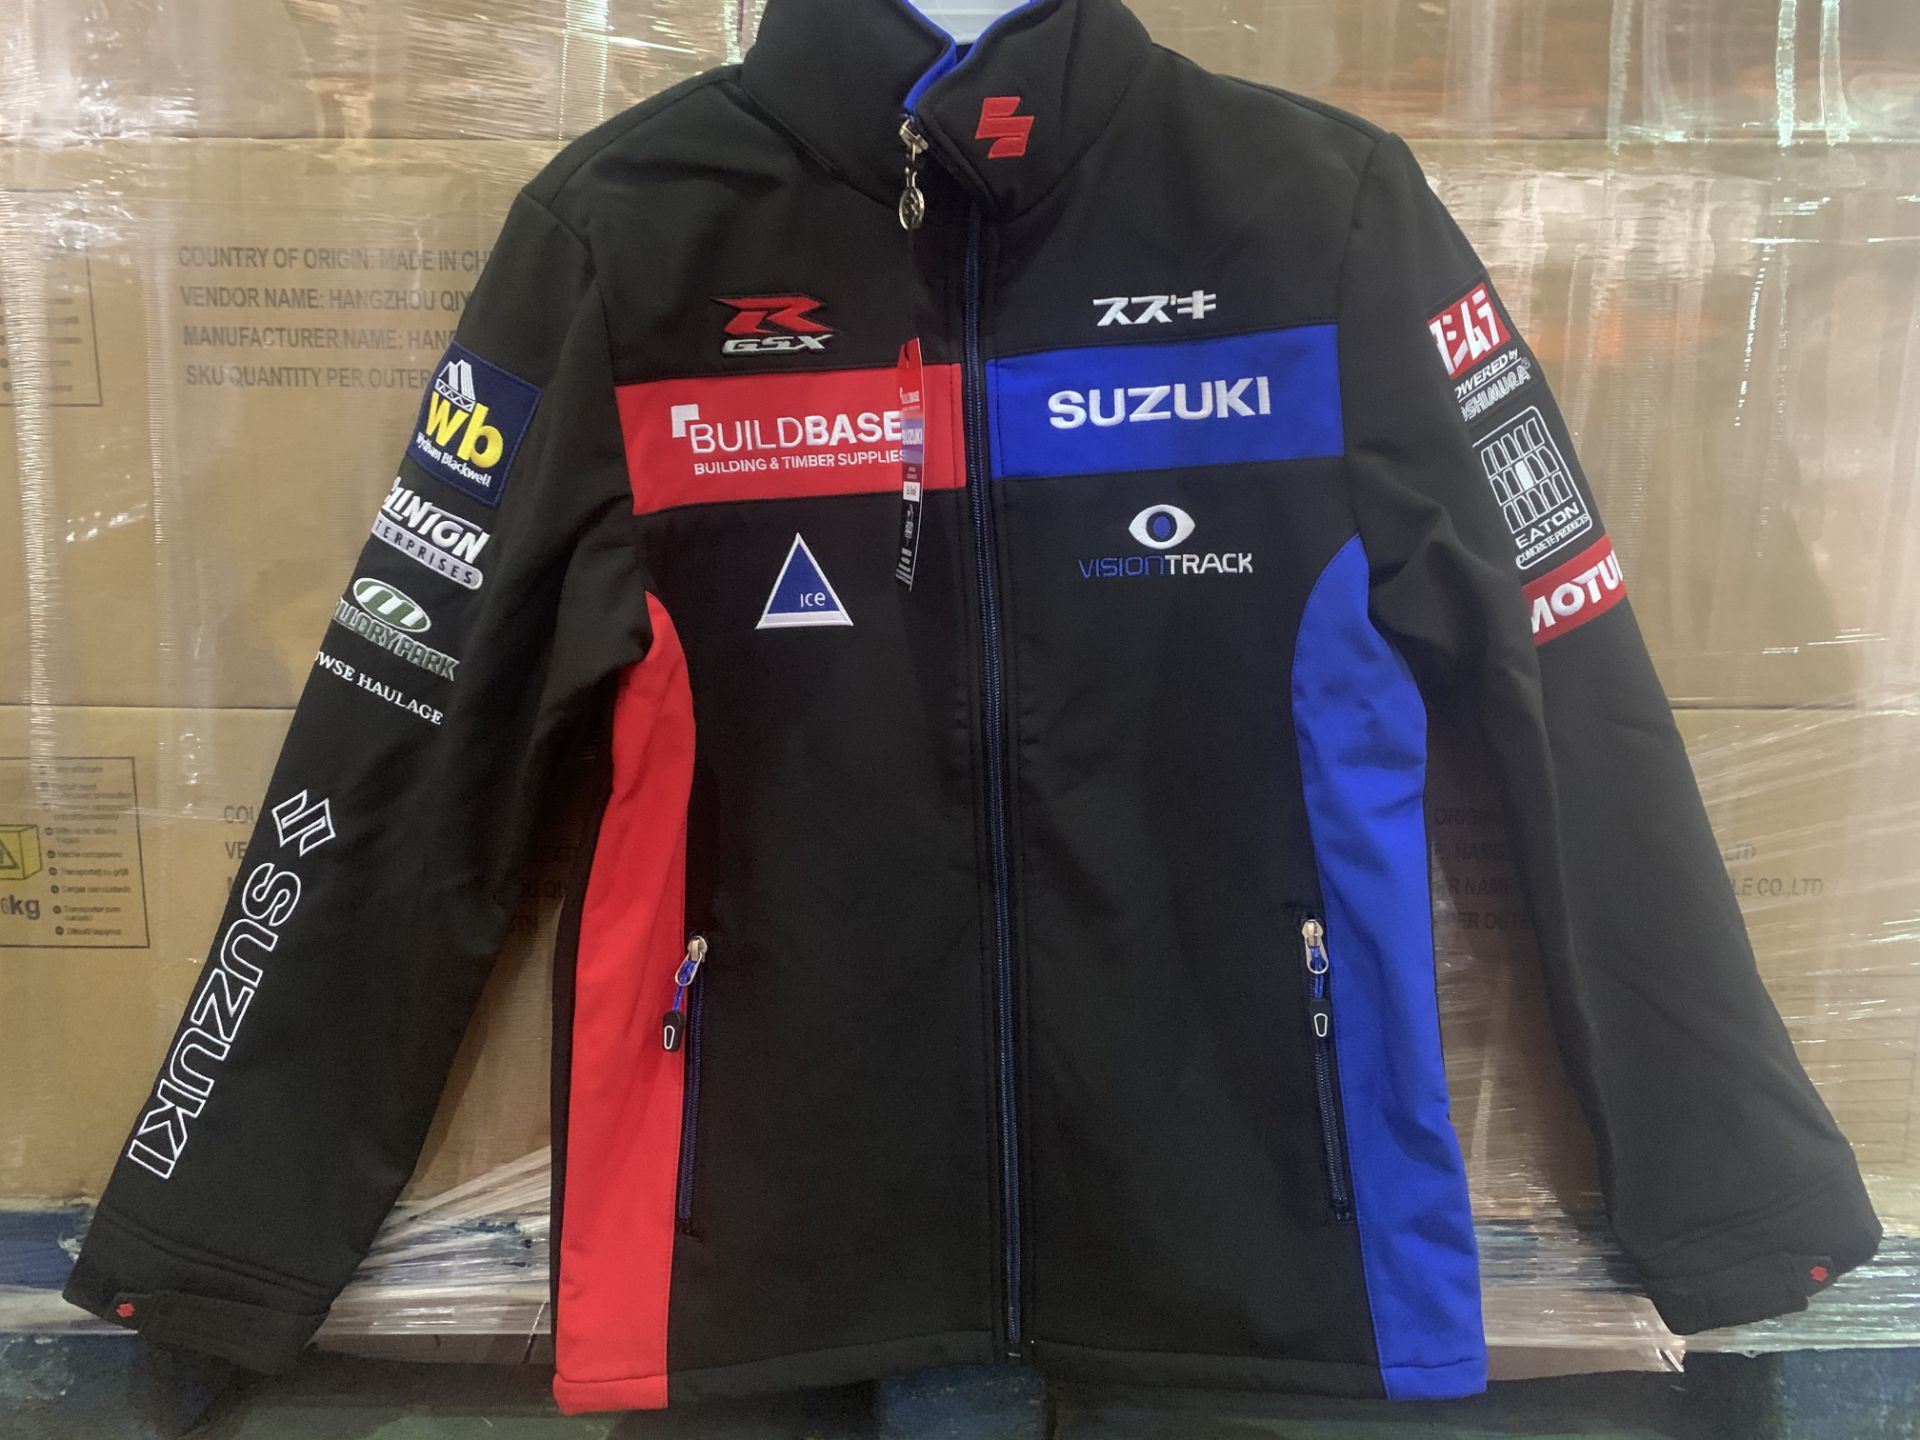 10 X BRAND NEW OFFICAL SUZUKI BUILDBASE JACKETS SIZE M AND XL